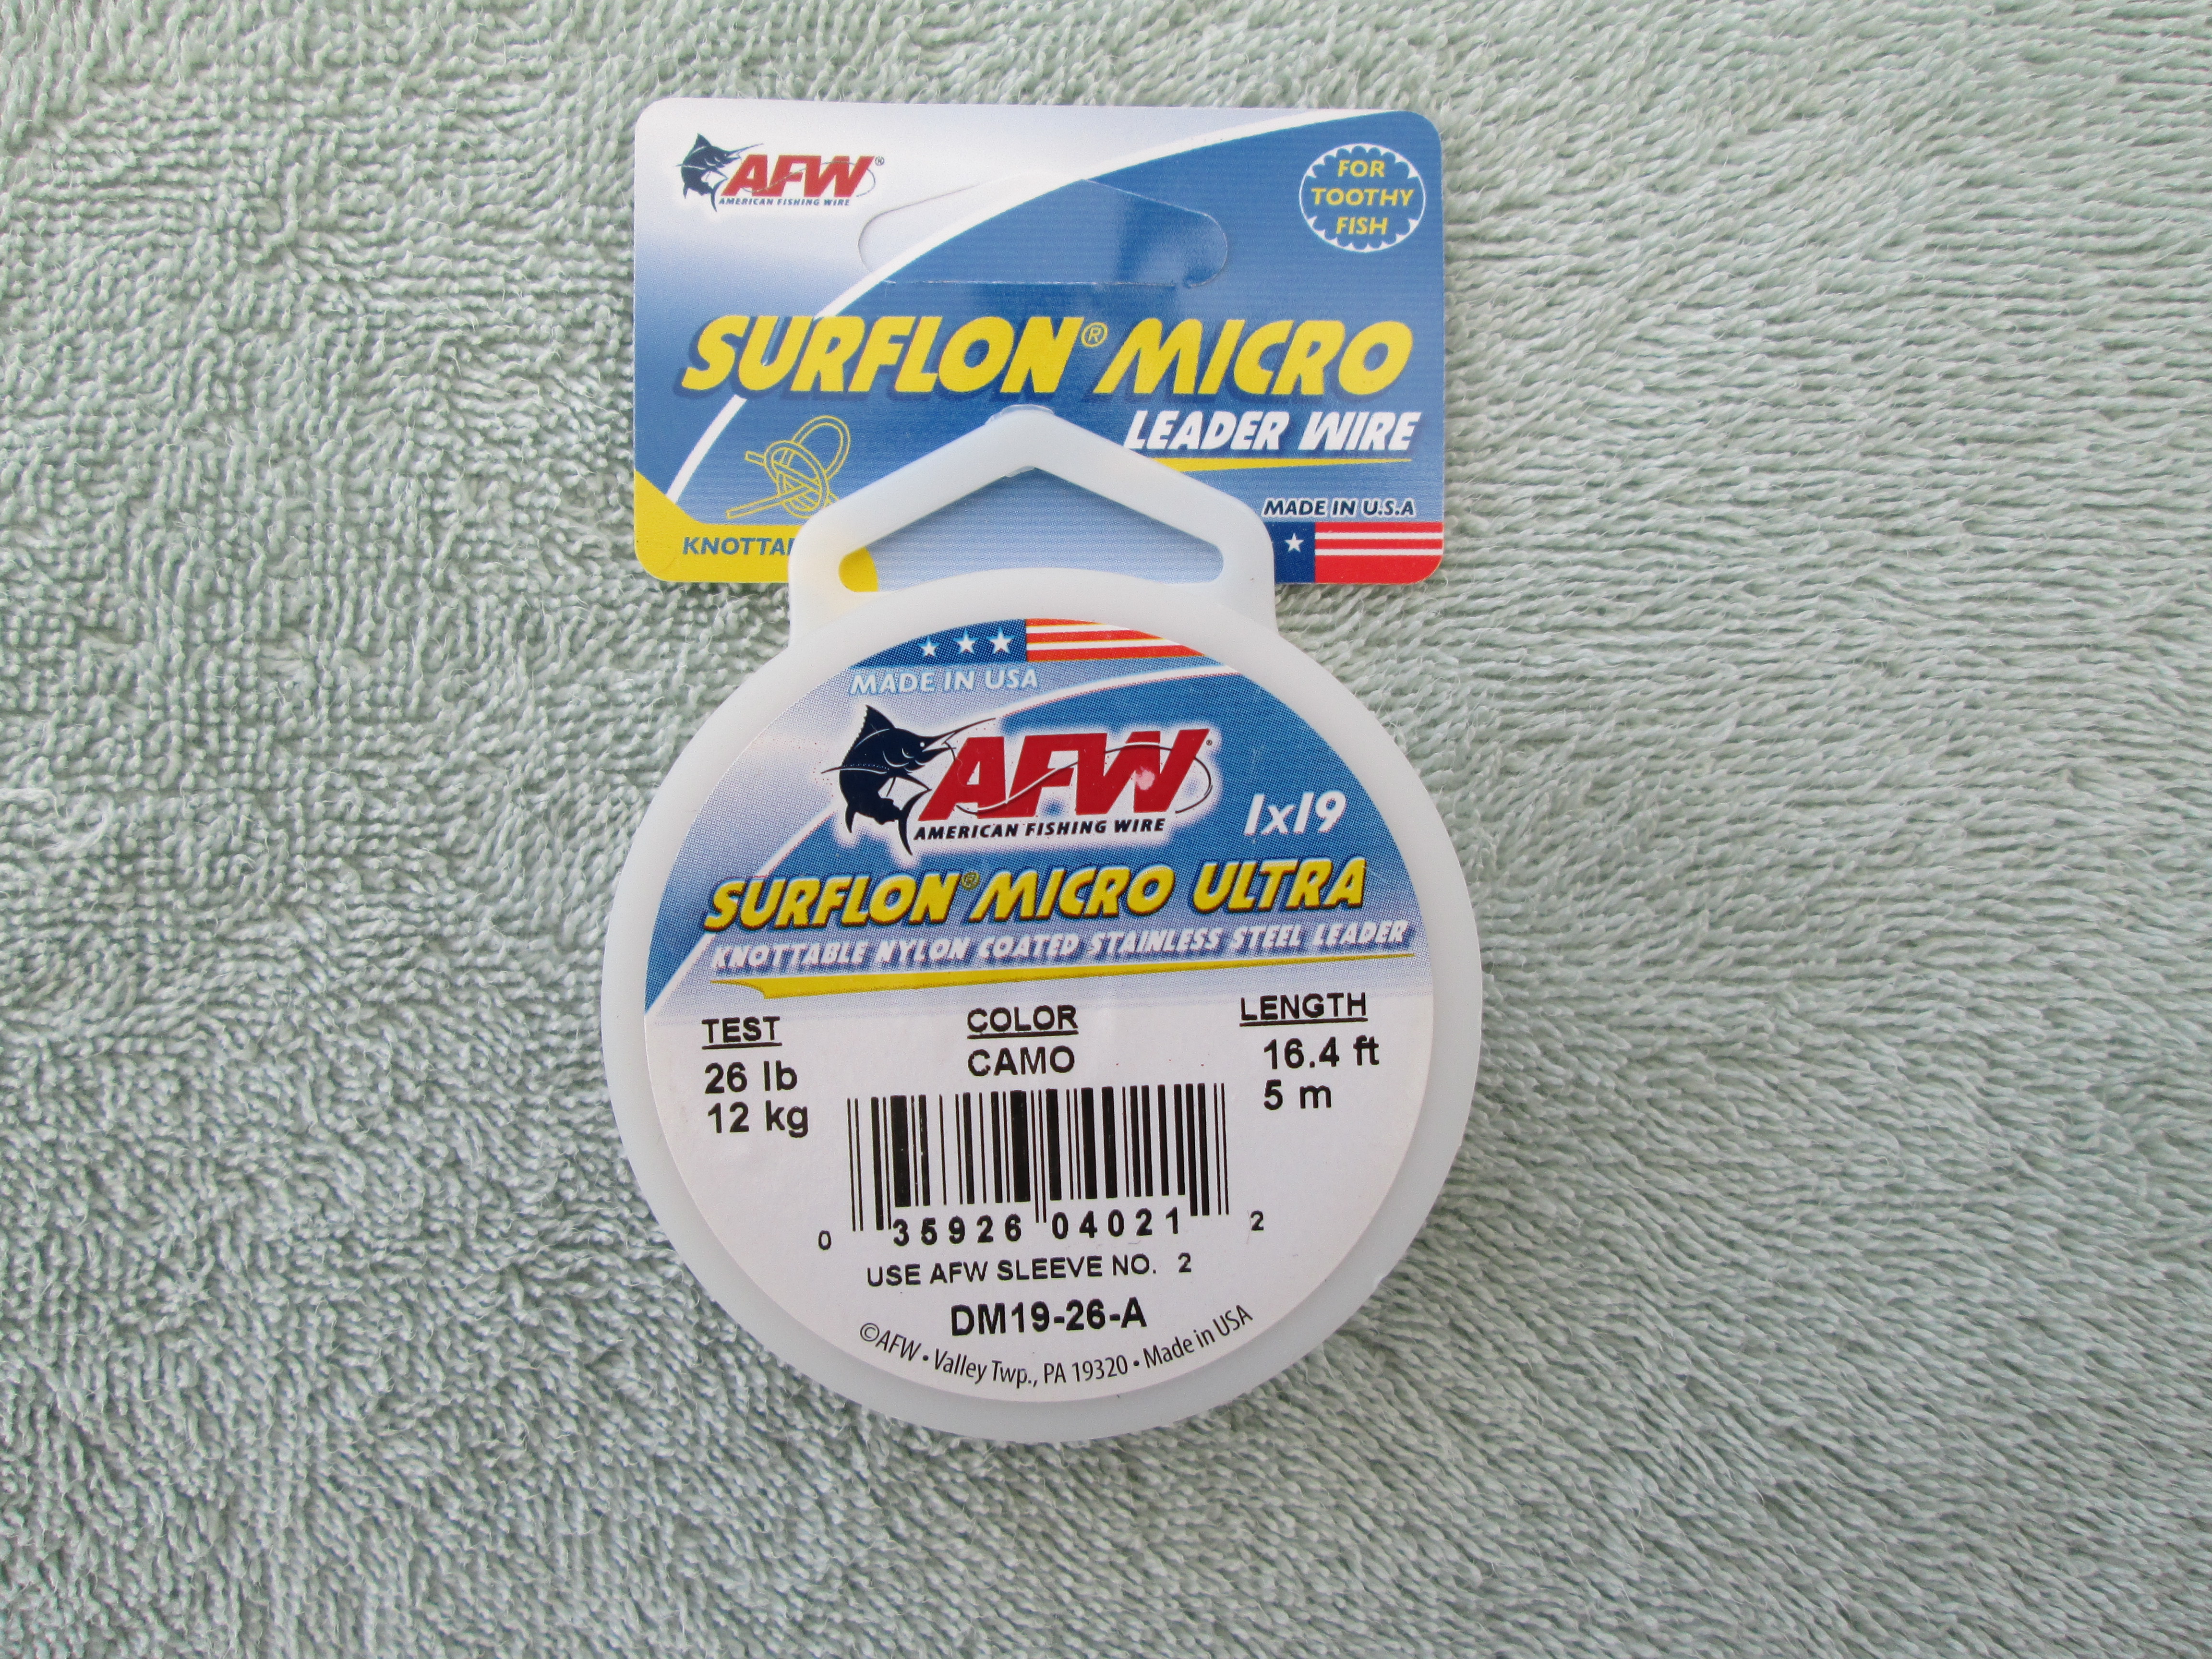 AFW Surflon Micro Ultra Nylon Coated 1x19 Stainless Steel Leader